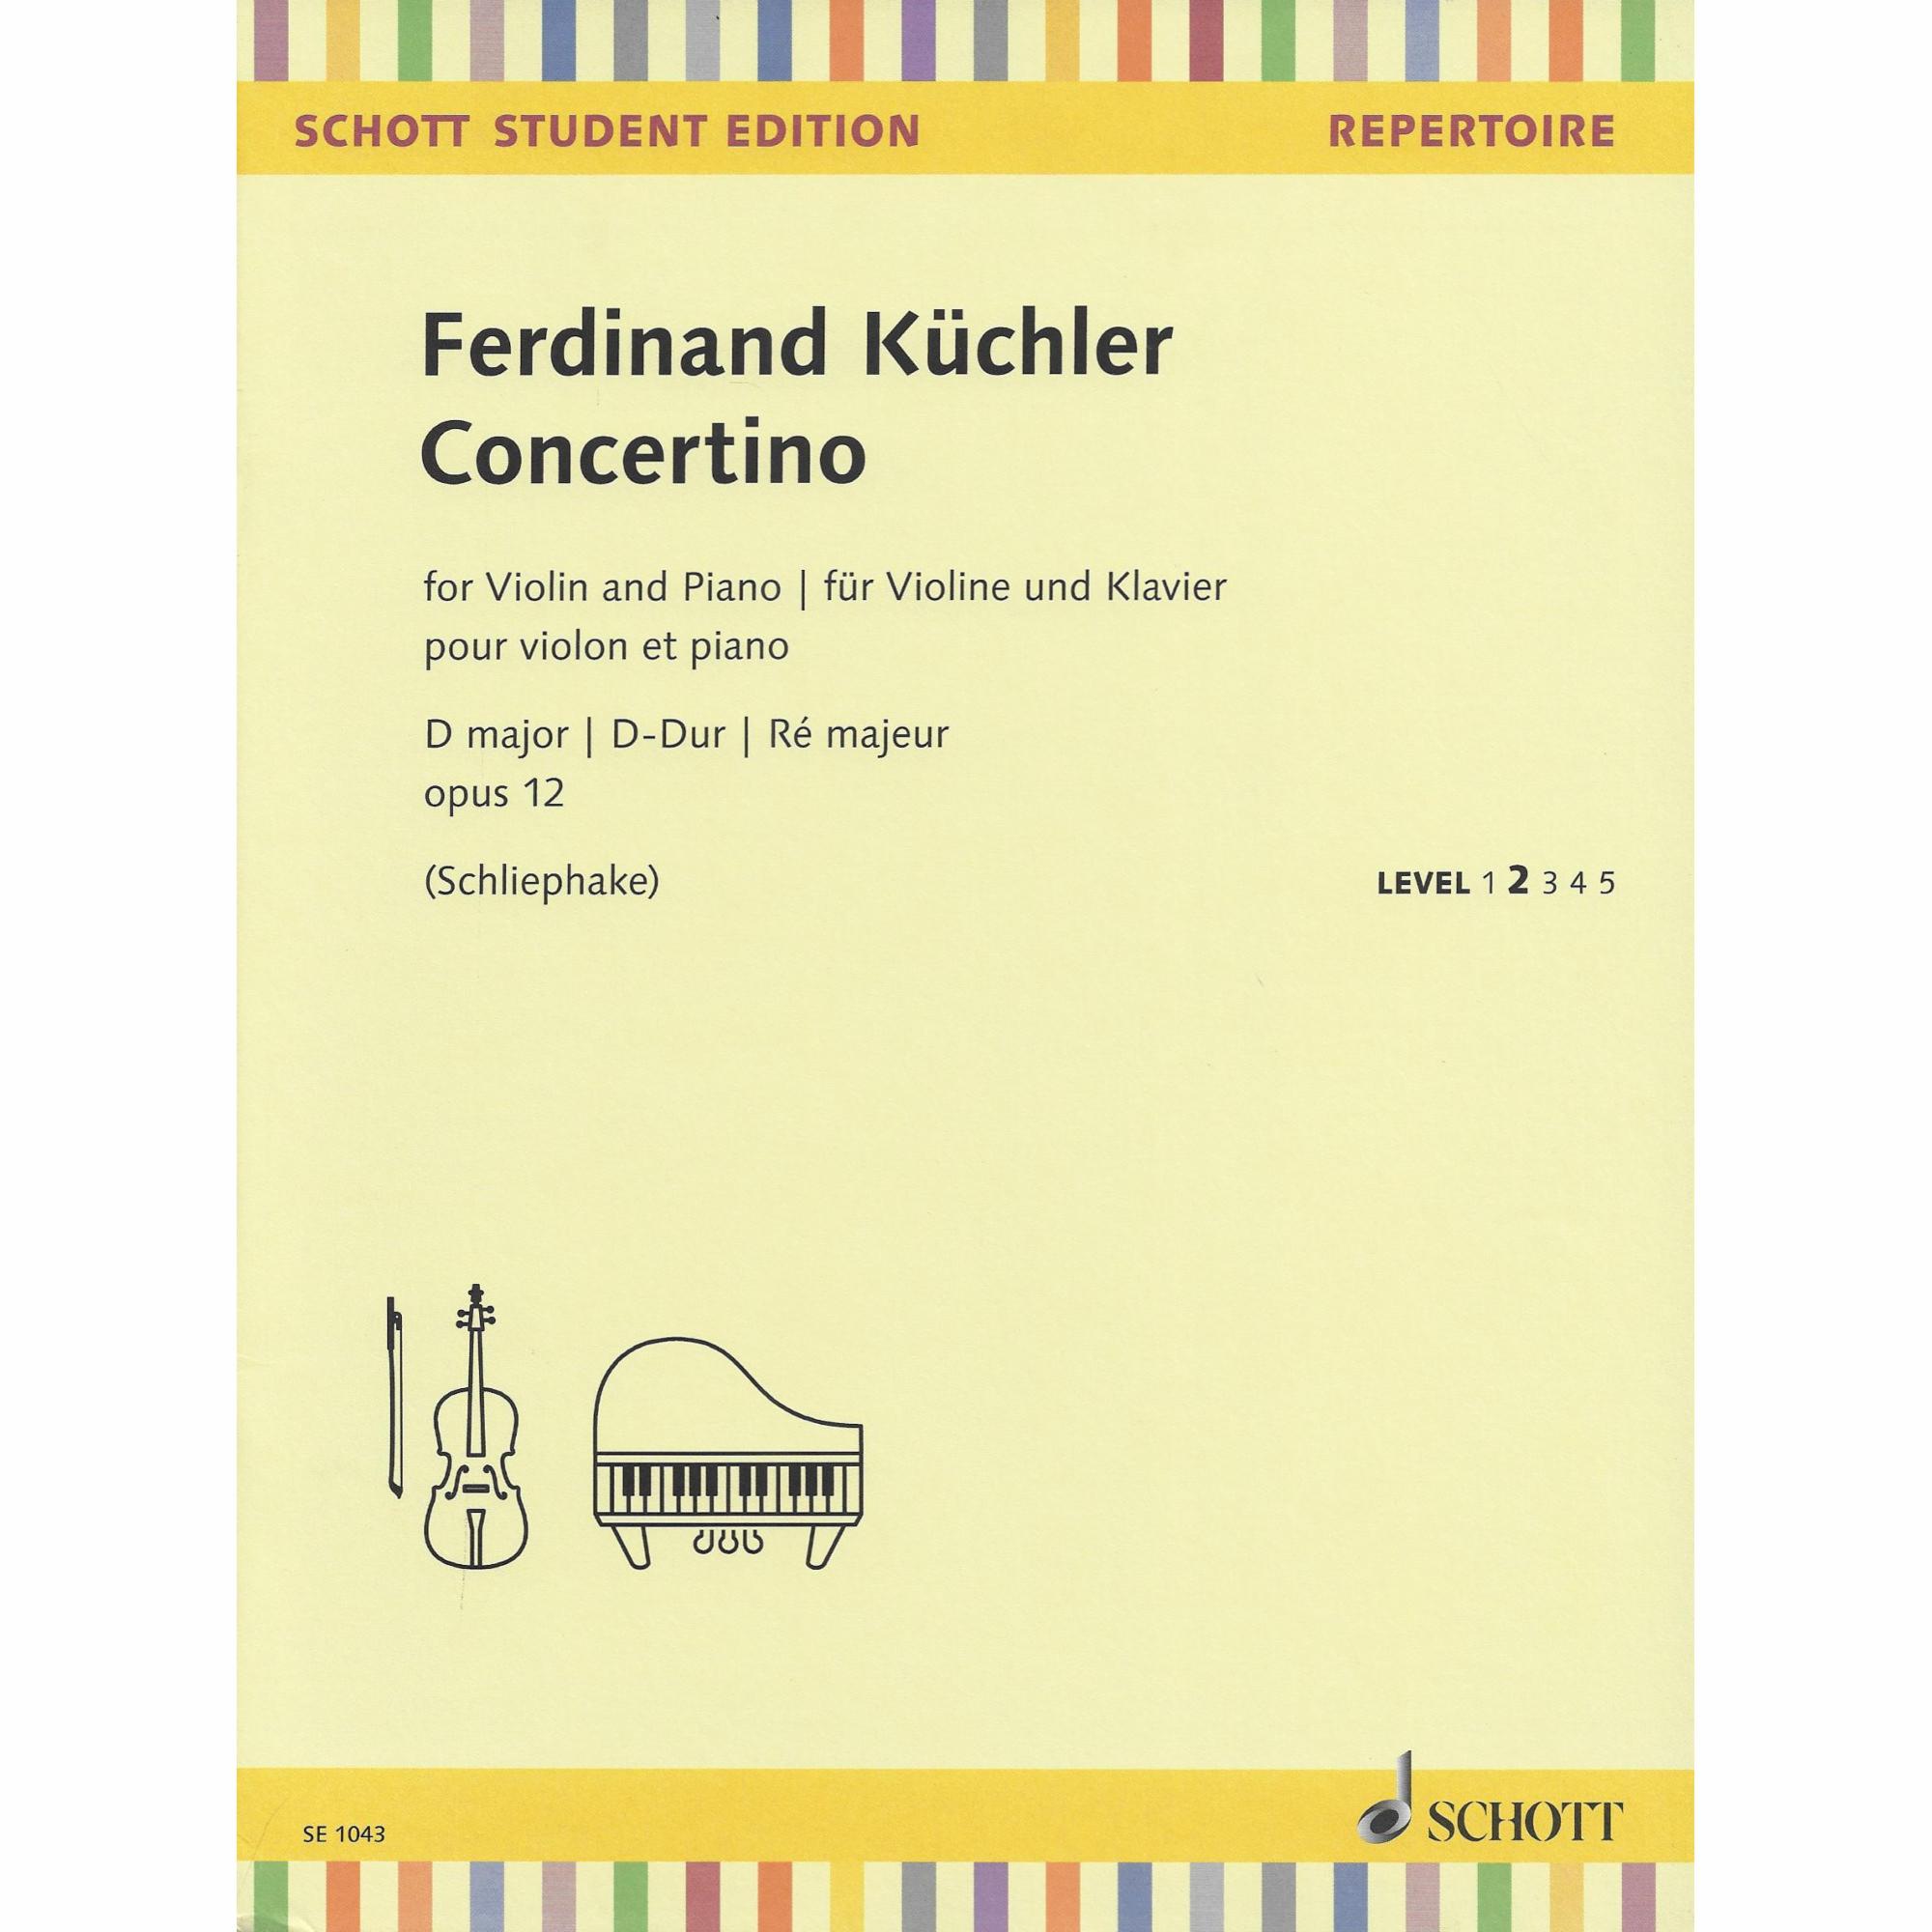 Kuchler -- Concertino in D Major, Op. 12 for Violin and Piano